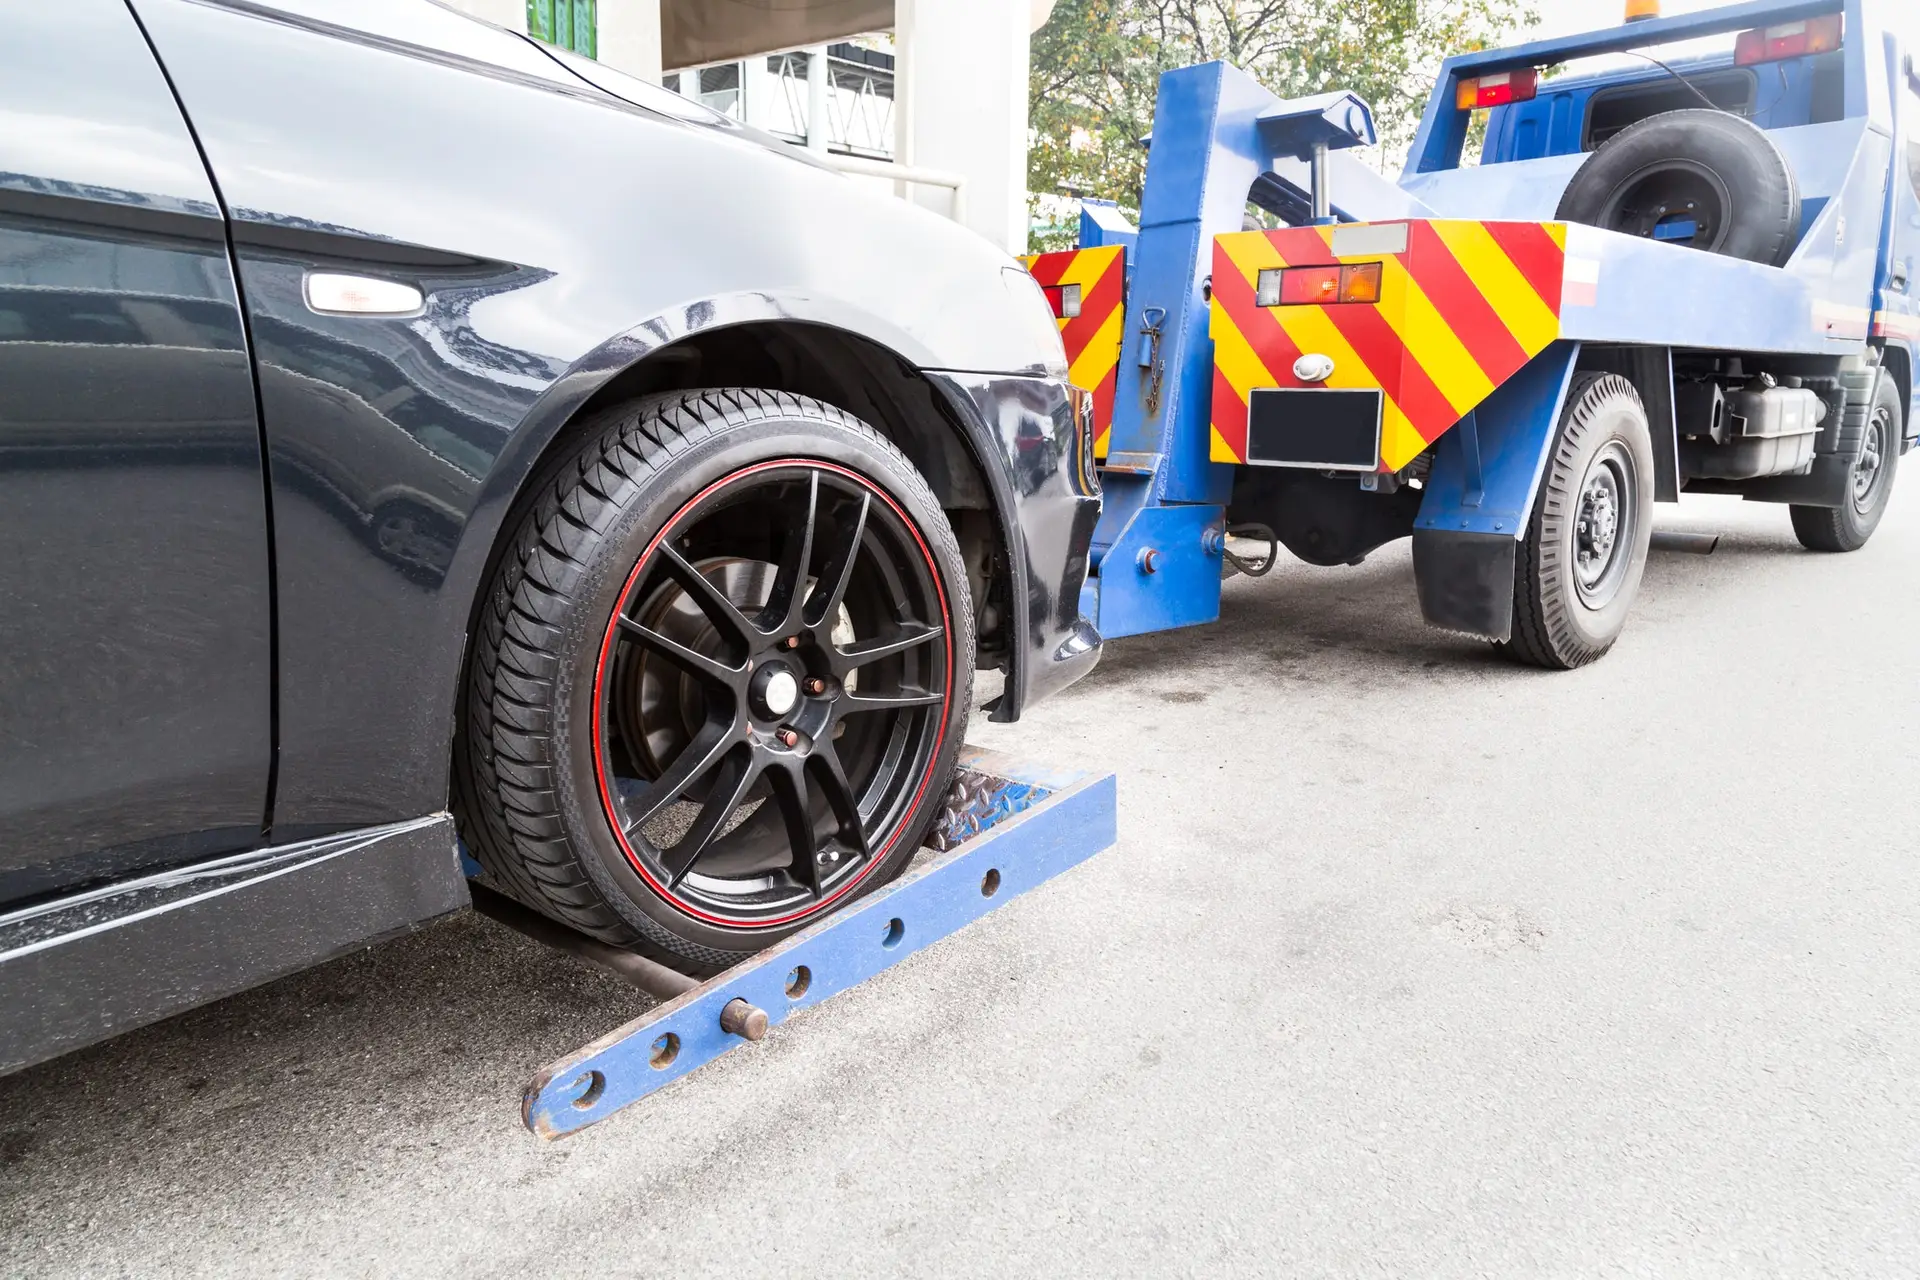 How To Find A Reliable Towing Equipment Provider Tow truck towing a broken down car on the street